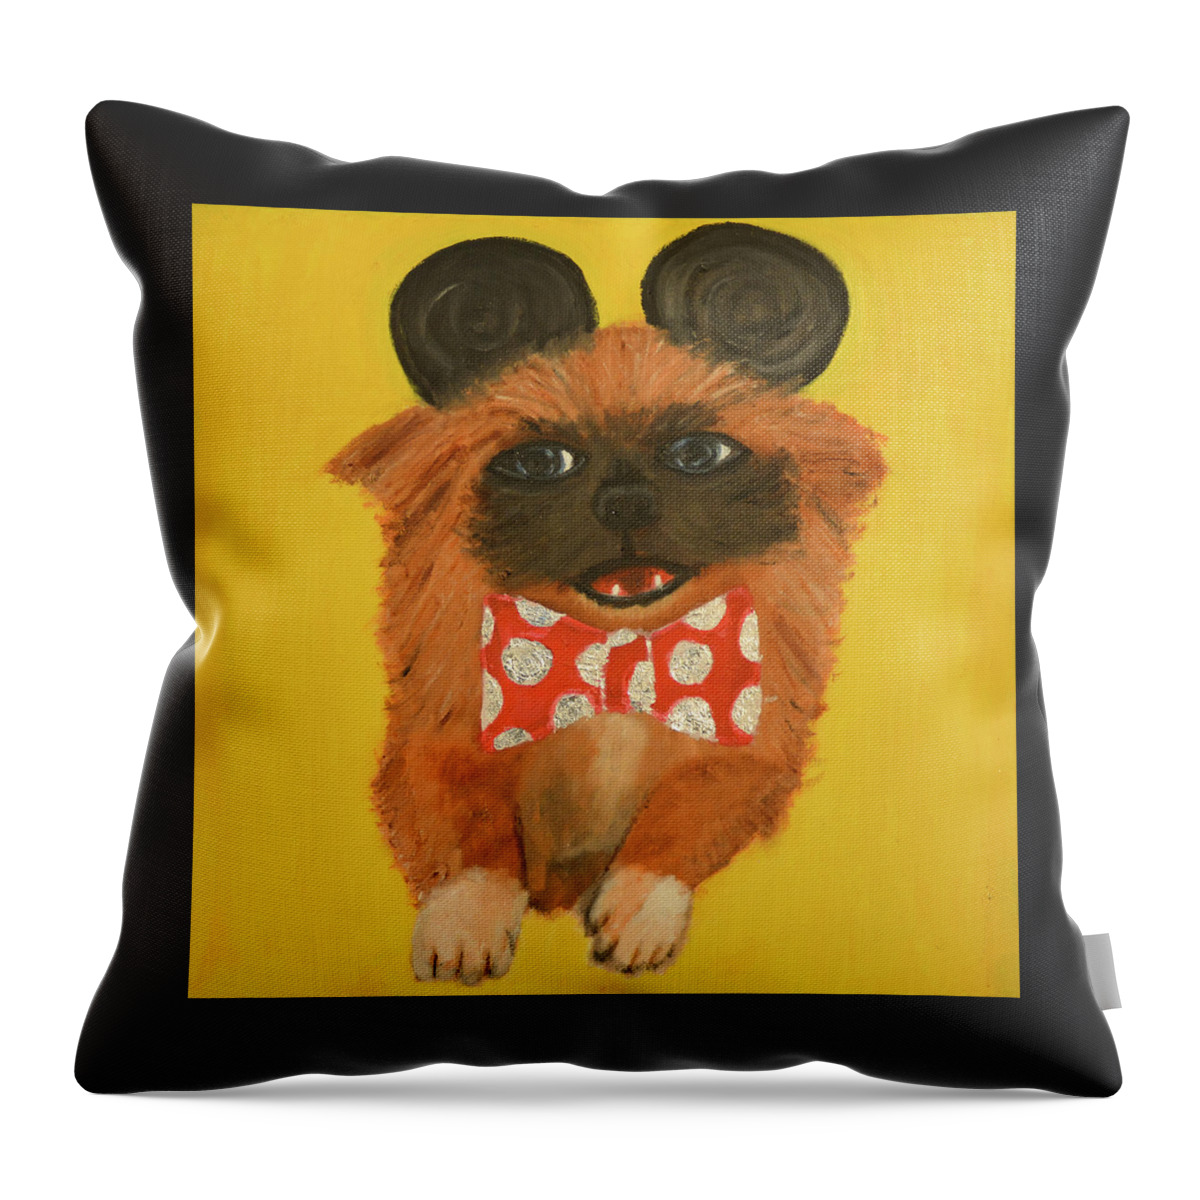 Tibbies Throw Pillow featuring the painting Dragon Goes To Disneyland by Anita Hummel